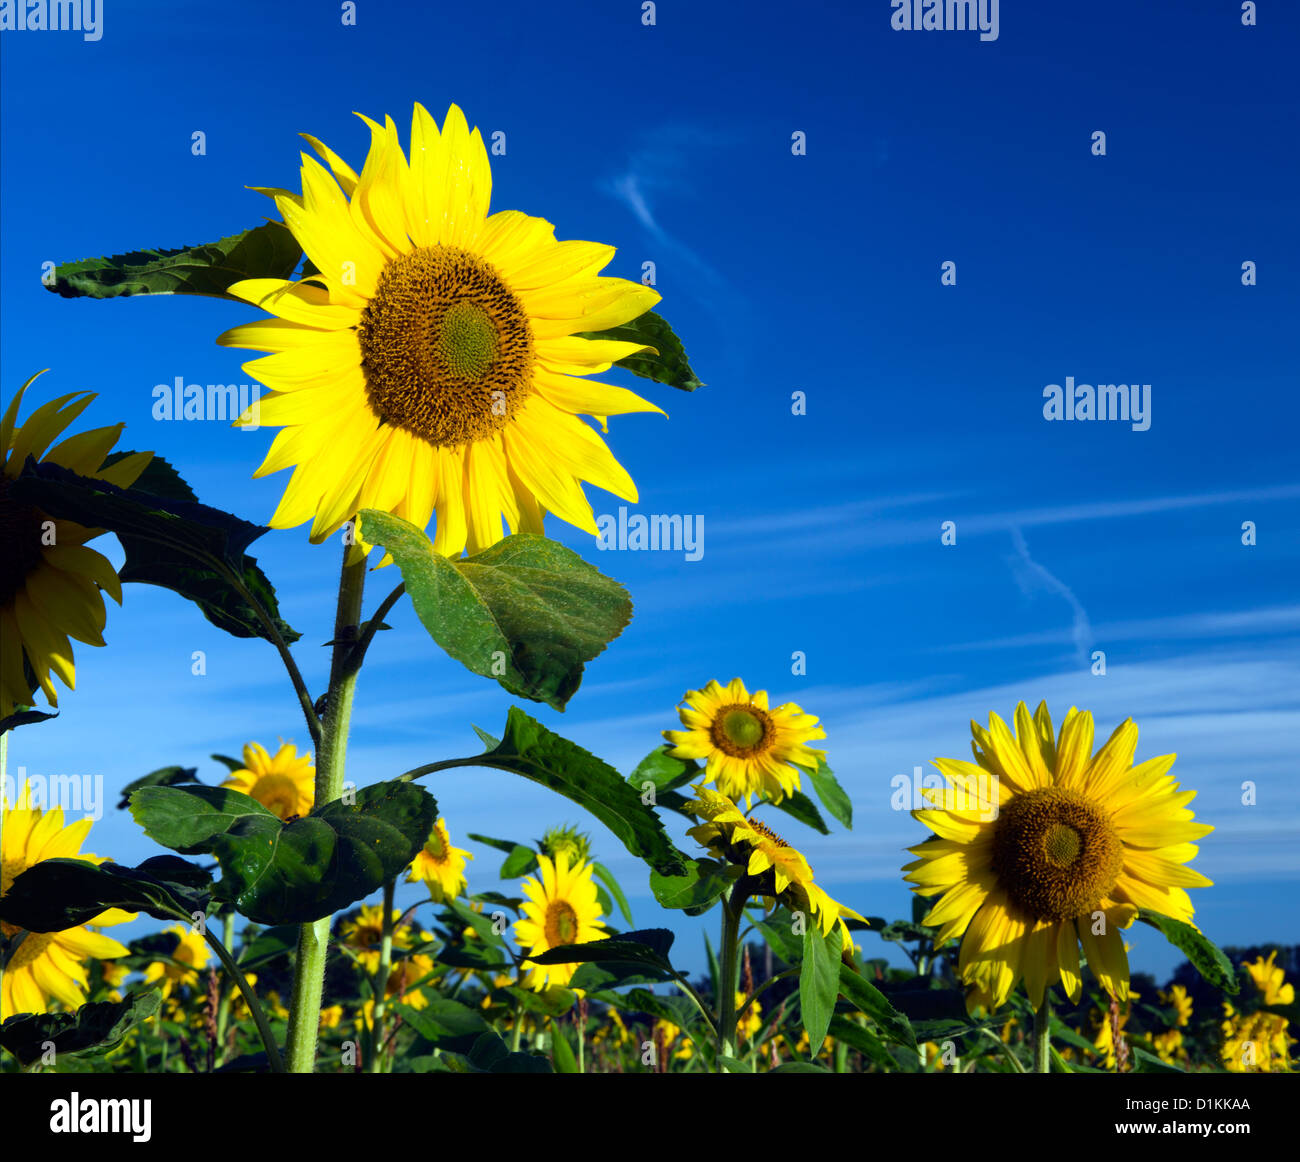 Sunflower (Helianthus annuus) is an annual plant native to the Americas. Stock Photo